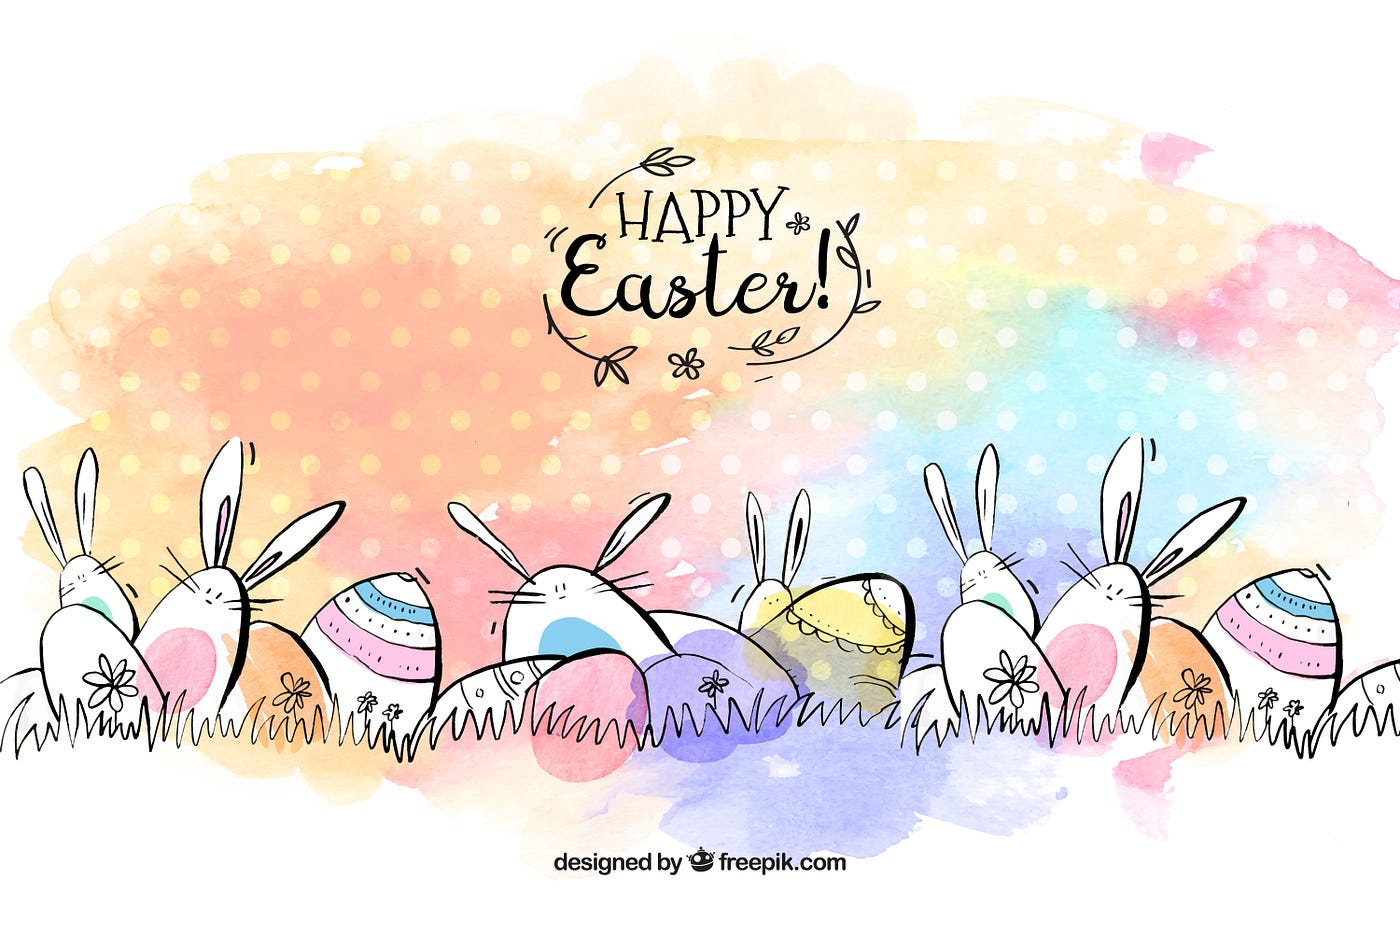 30 Amazing Easter Cards For Friends And Family | by Vectr | Vectr ...